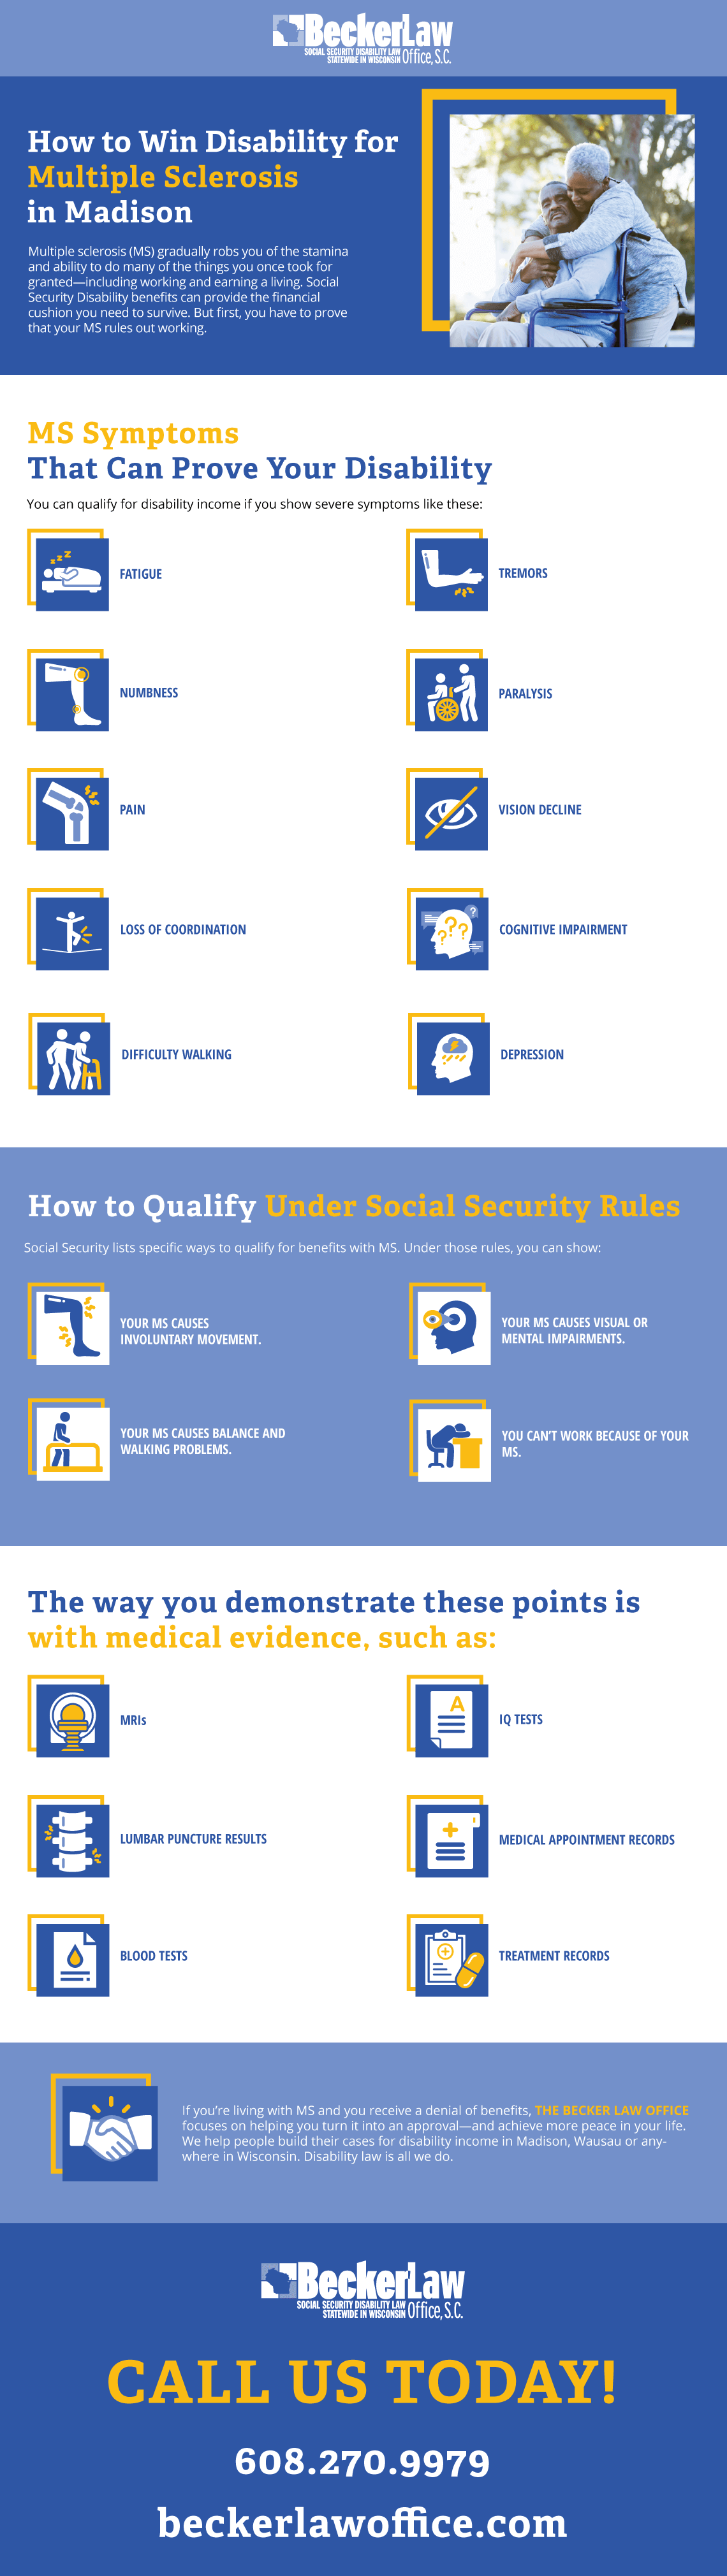 An infographic on how to win disability benefits for multiple sclerosis.